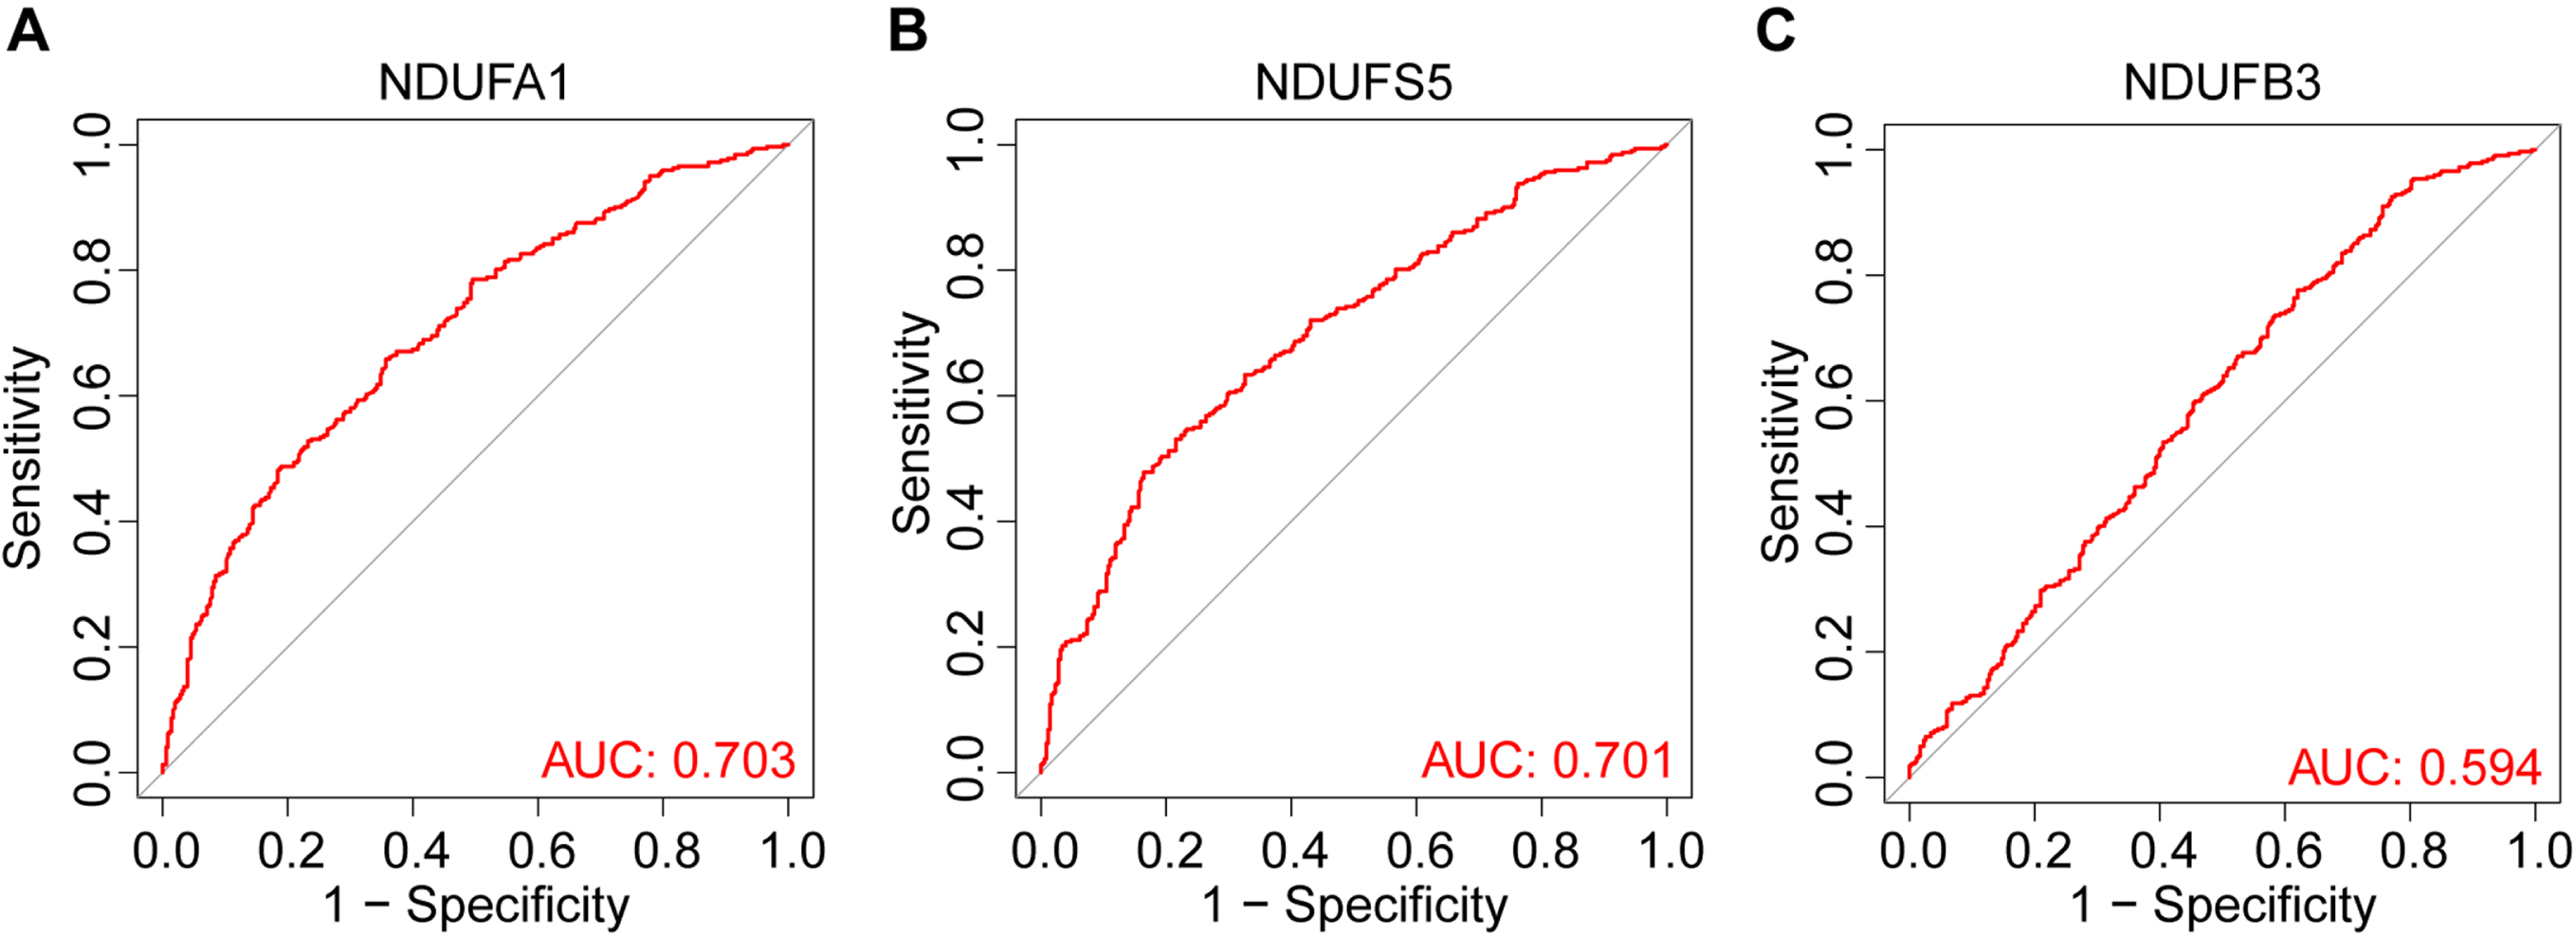 ROC curves and corresponding AUC values for the training groups. The ROC curves of NDUFA1 (A), NDUFS5 (B), and NDUFB3 (C), AUC values were 0.703, 0.701, and 0.594 respectively.